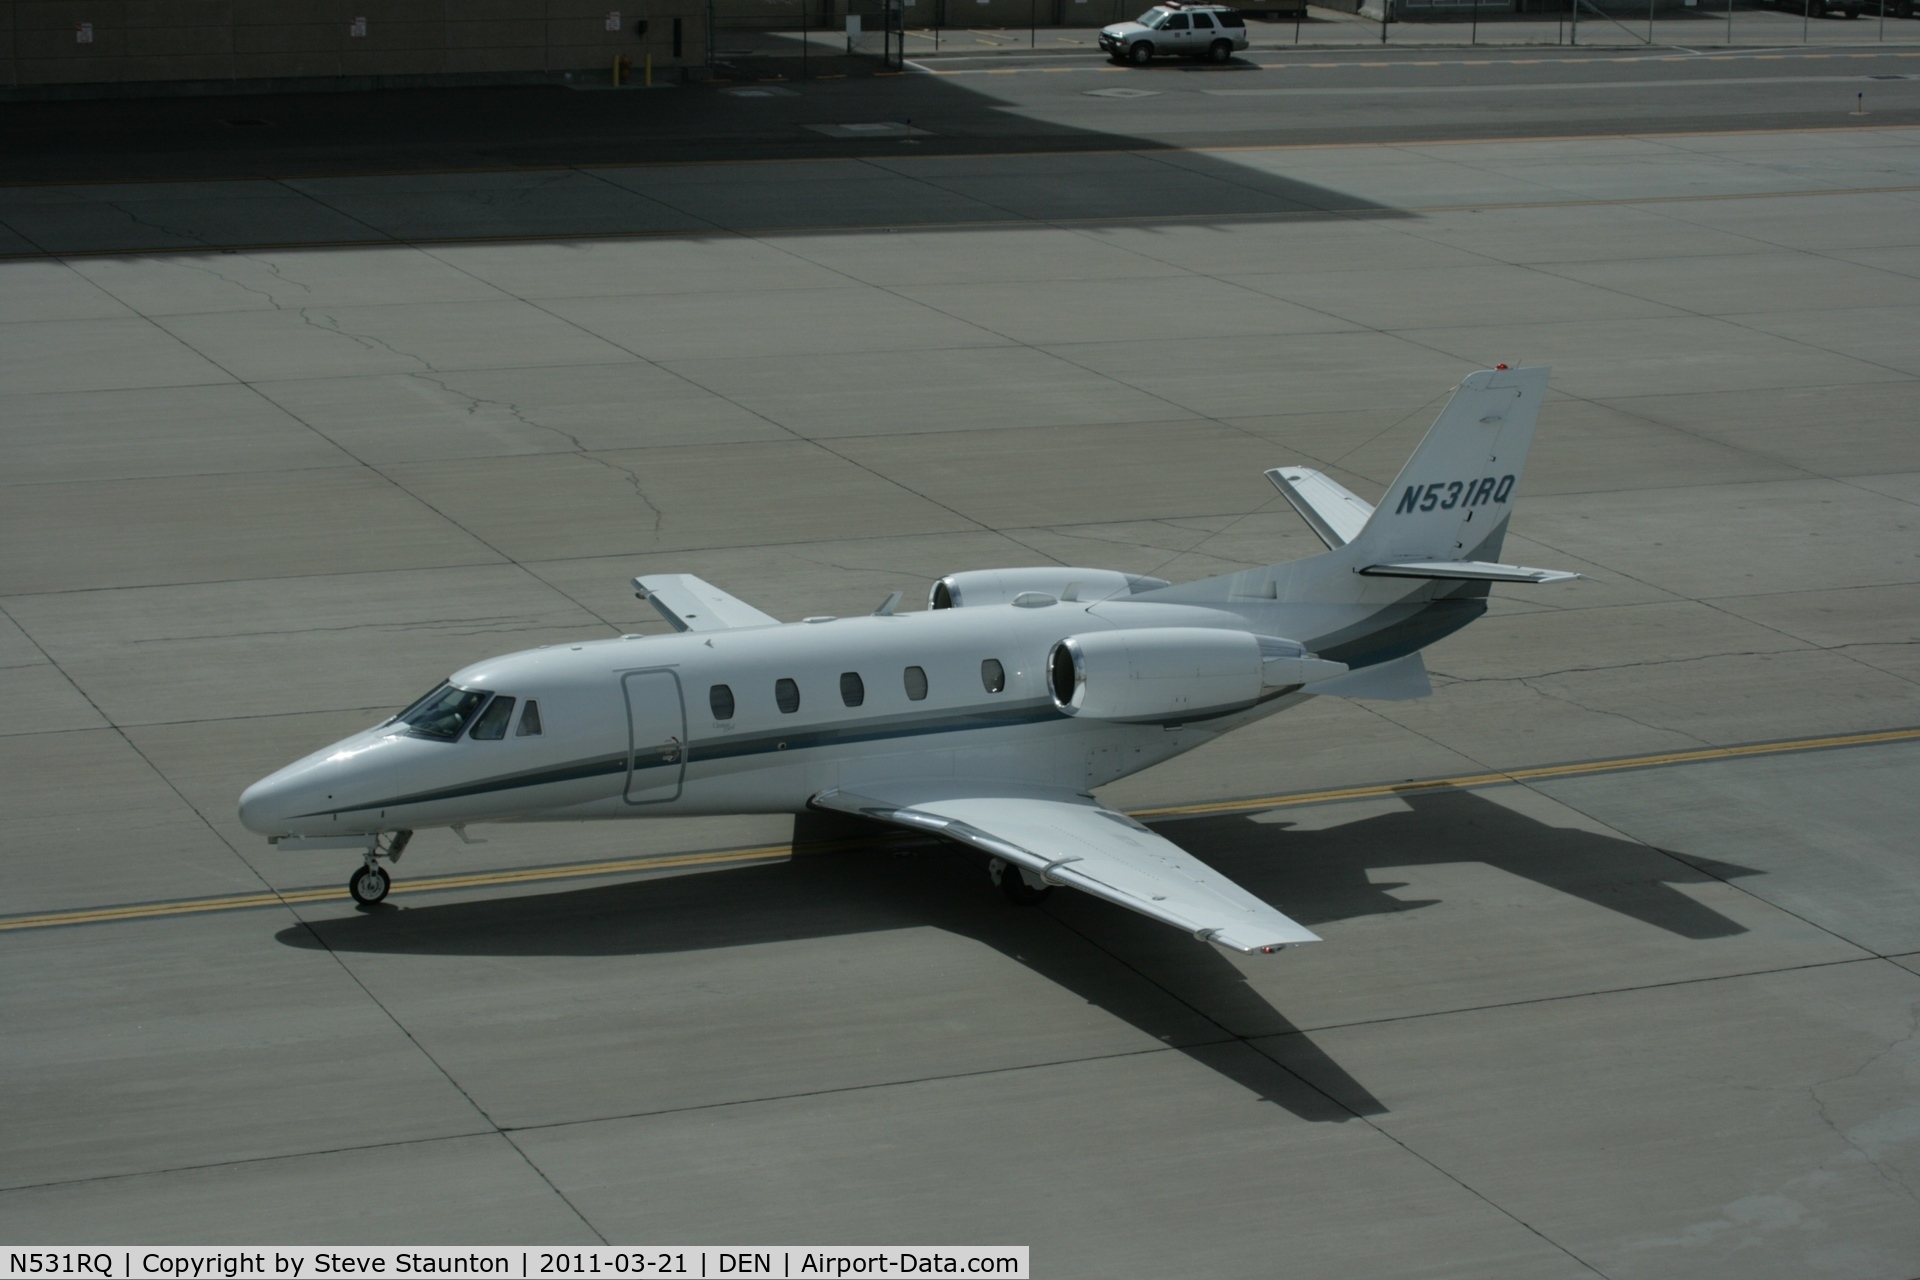 N531RQ, 2001 Cessna 560XL Citation Excel C/N 560-5184, Taken at Denver International Airport, in March 2011 whilst on an Aeroprint Aviation tour